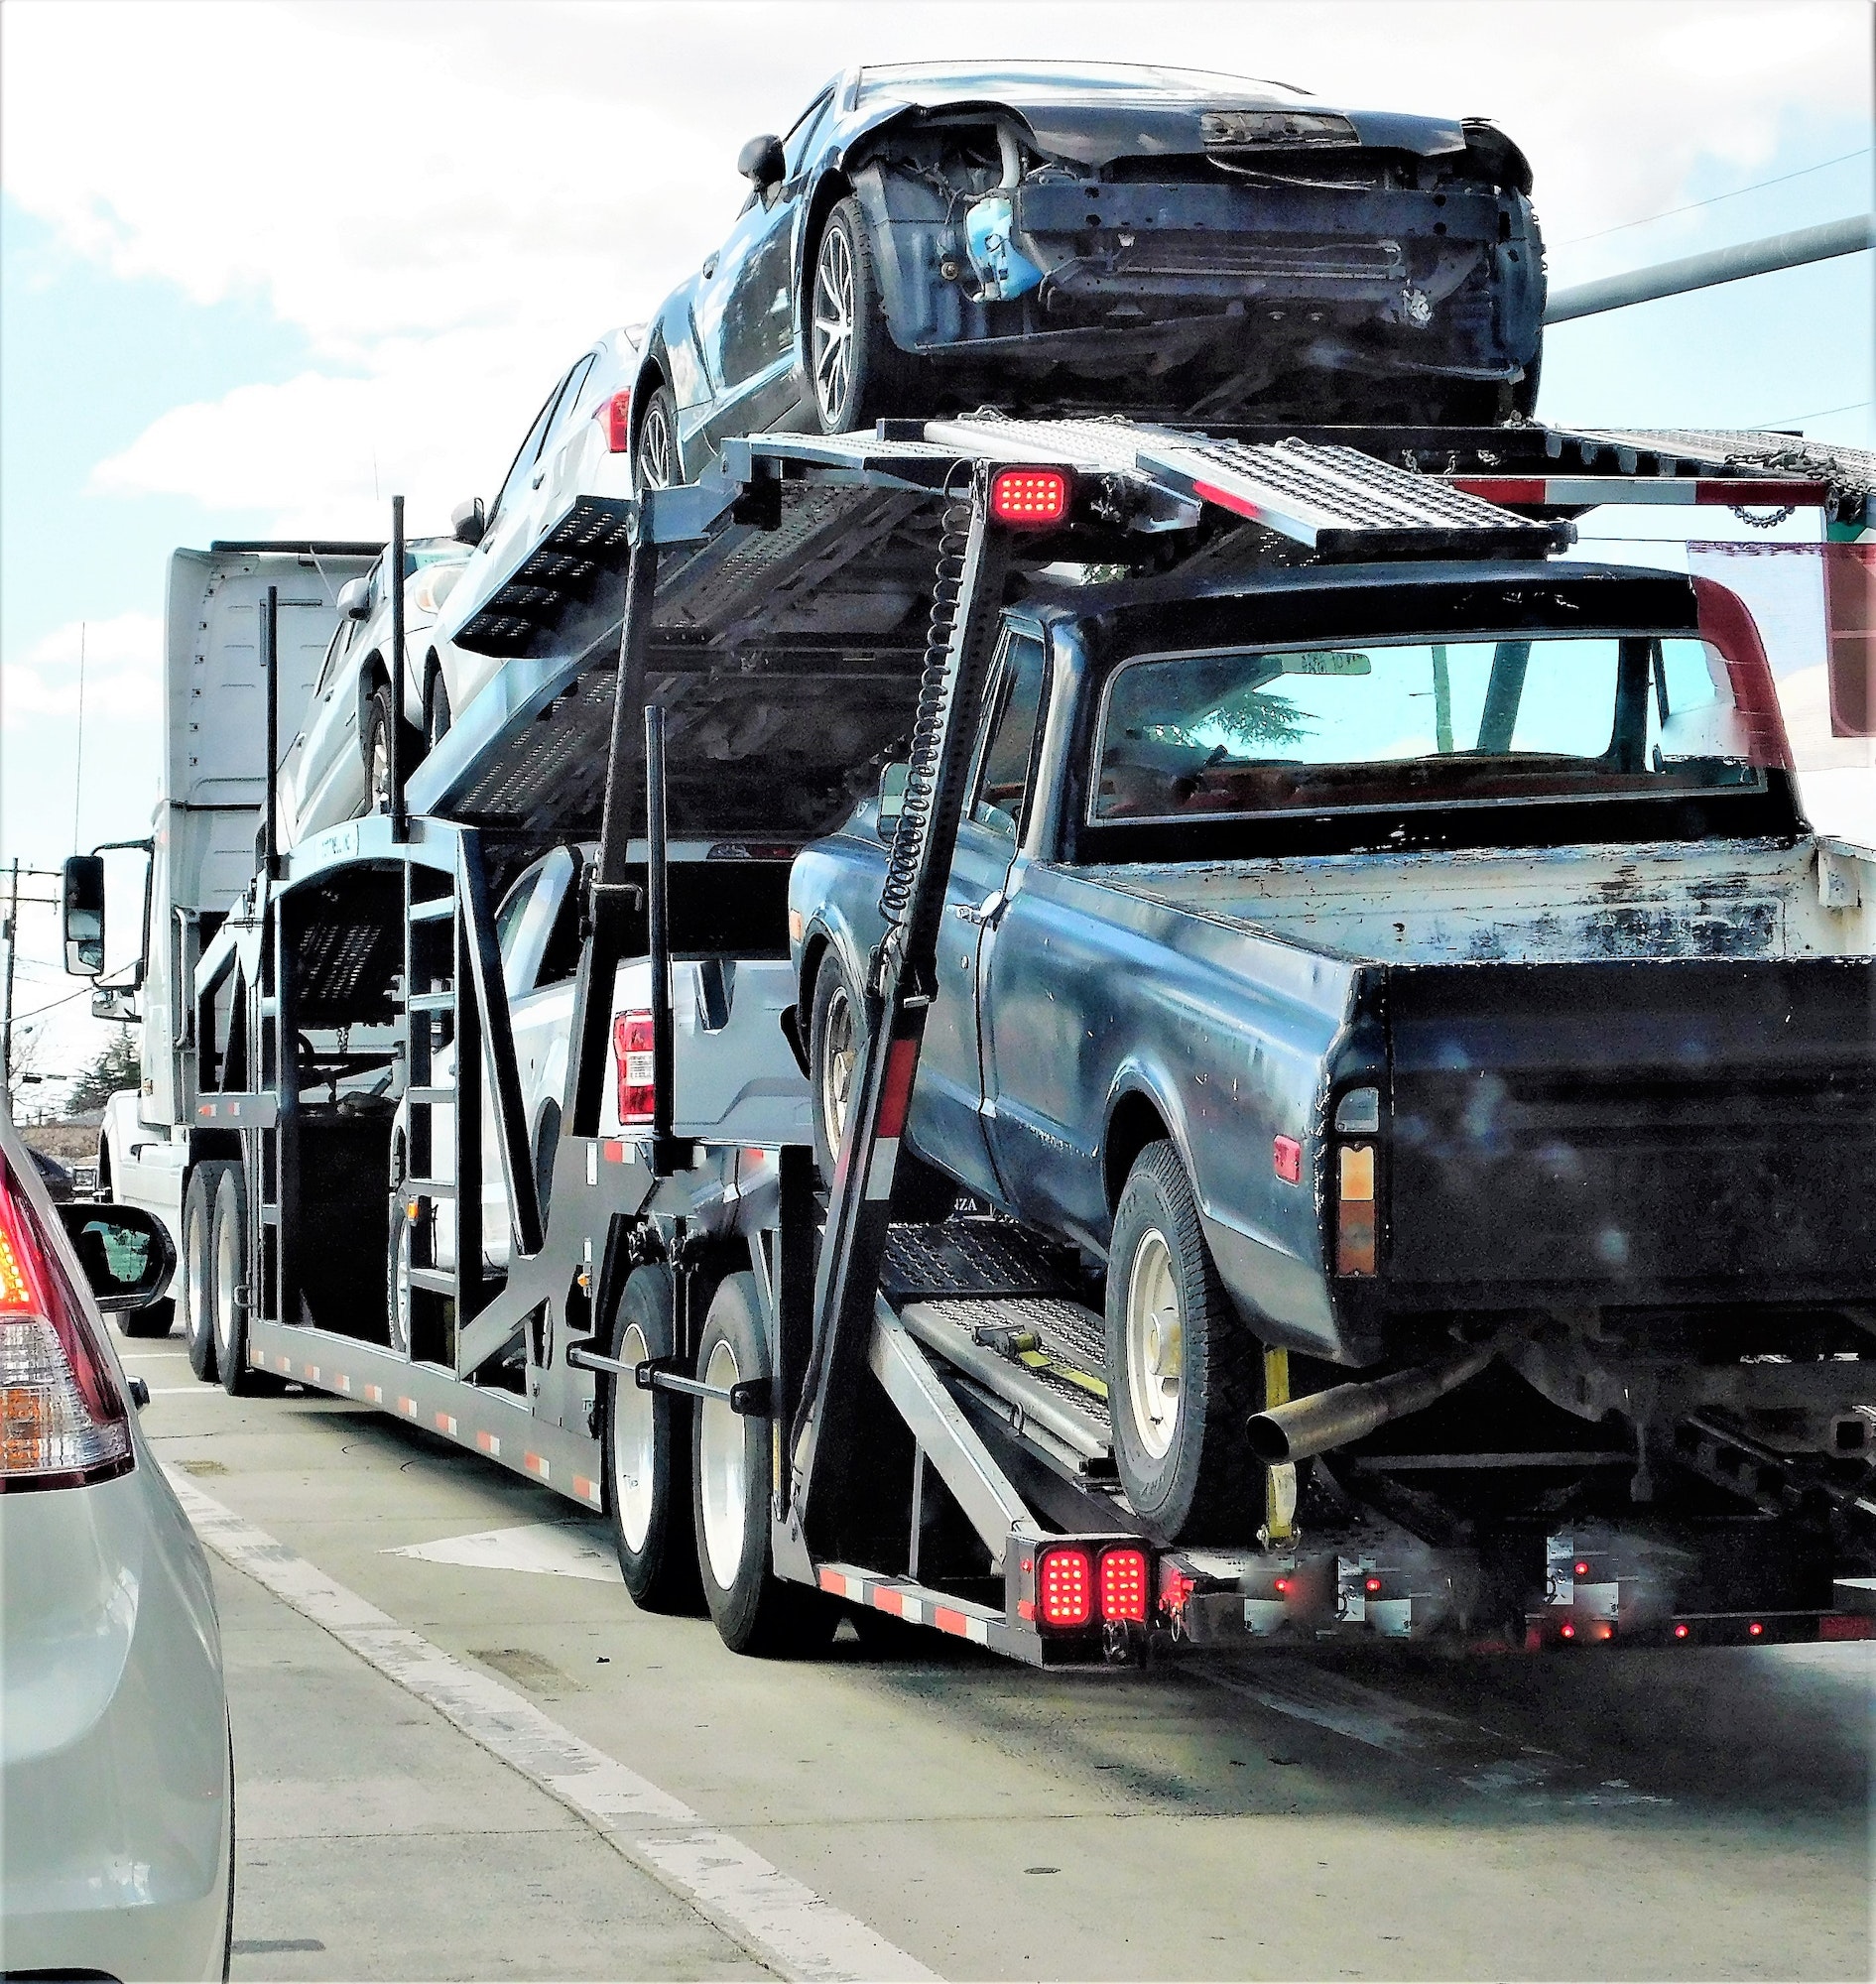 Car Hauler Trailer Filled with Vehicles!